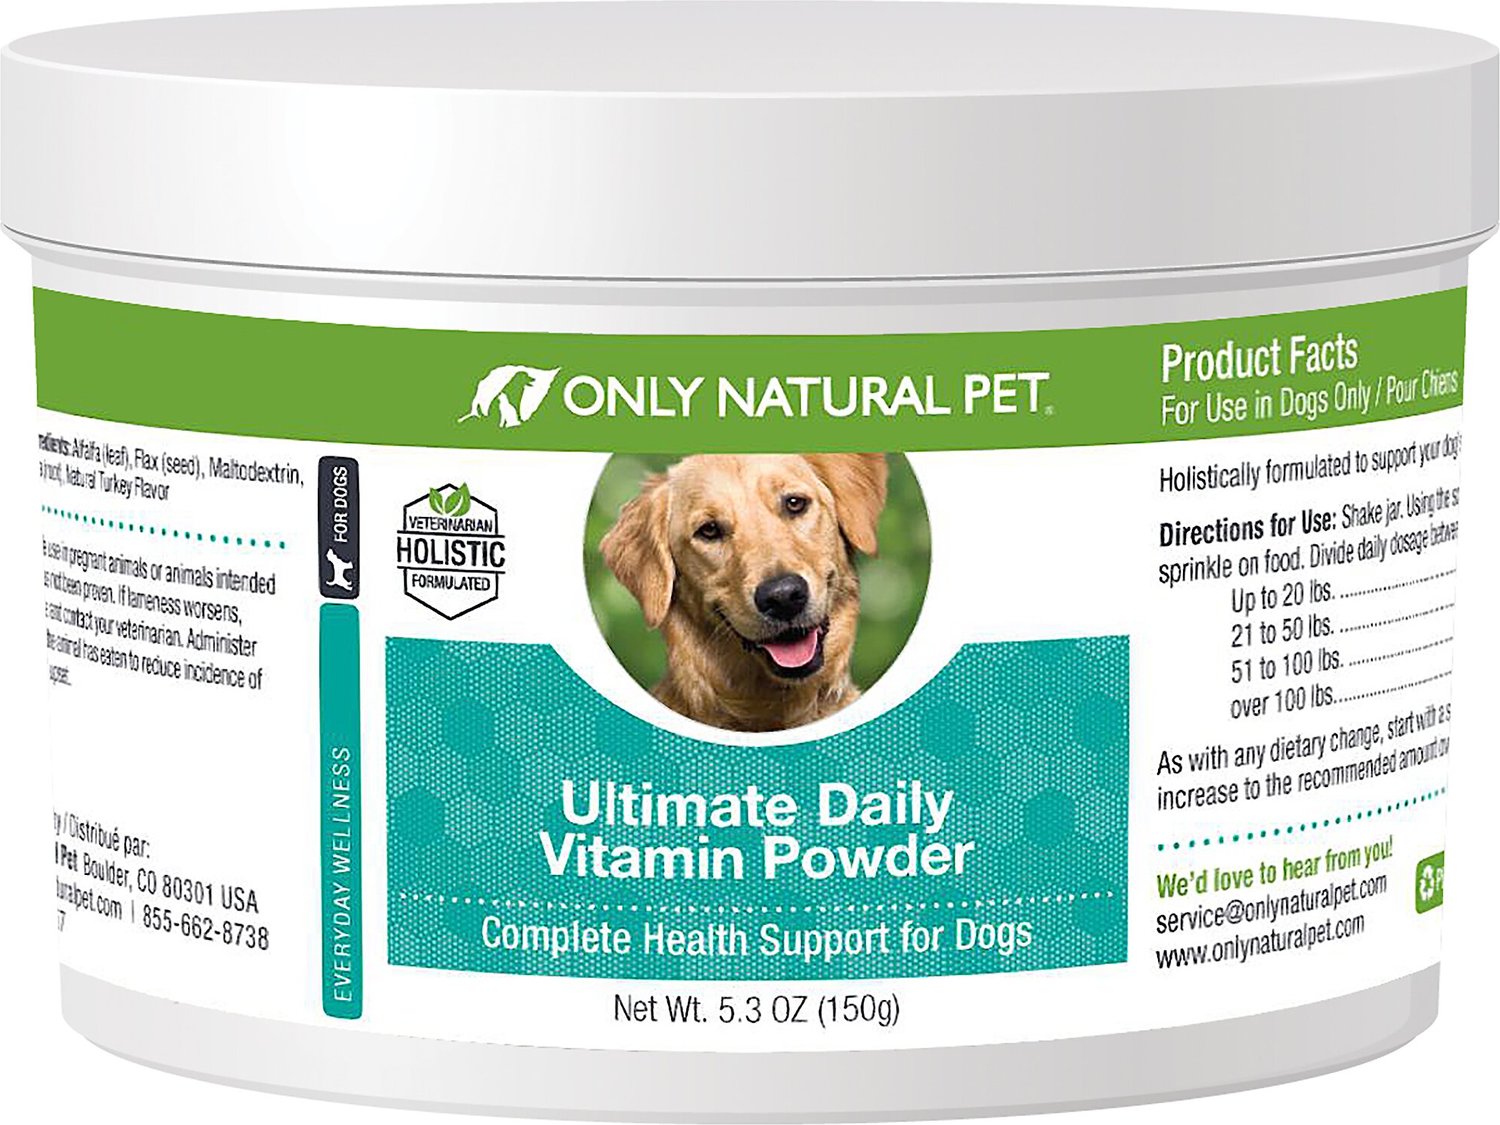 ONLY NATURAL PET Ultimate Daily Vitamins Powder Dog Supplement, 5.3-oz